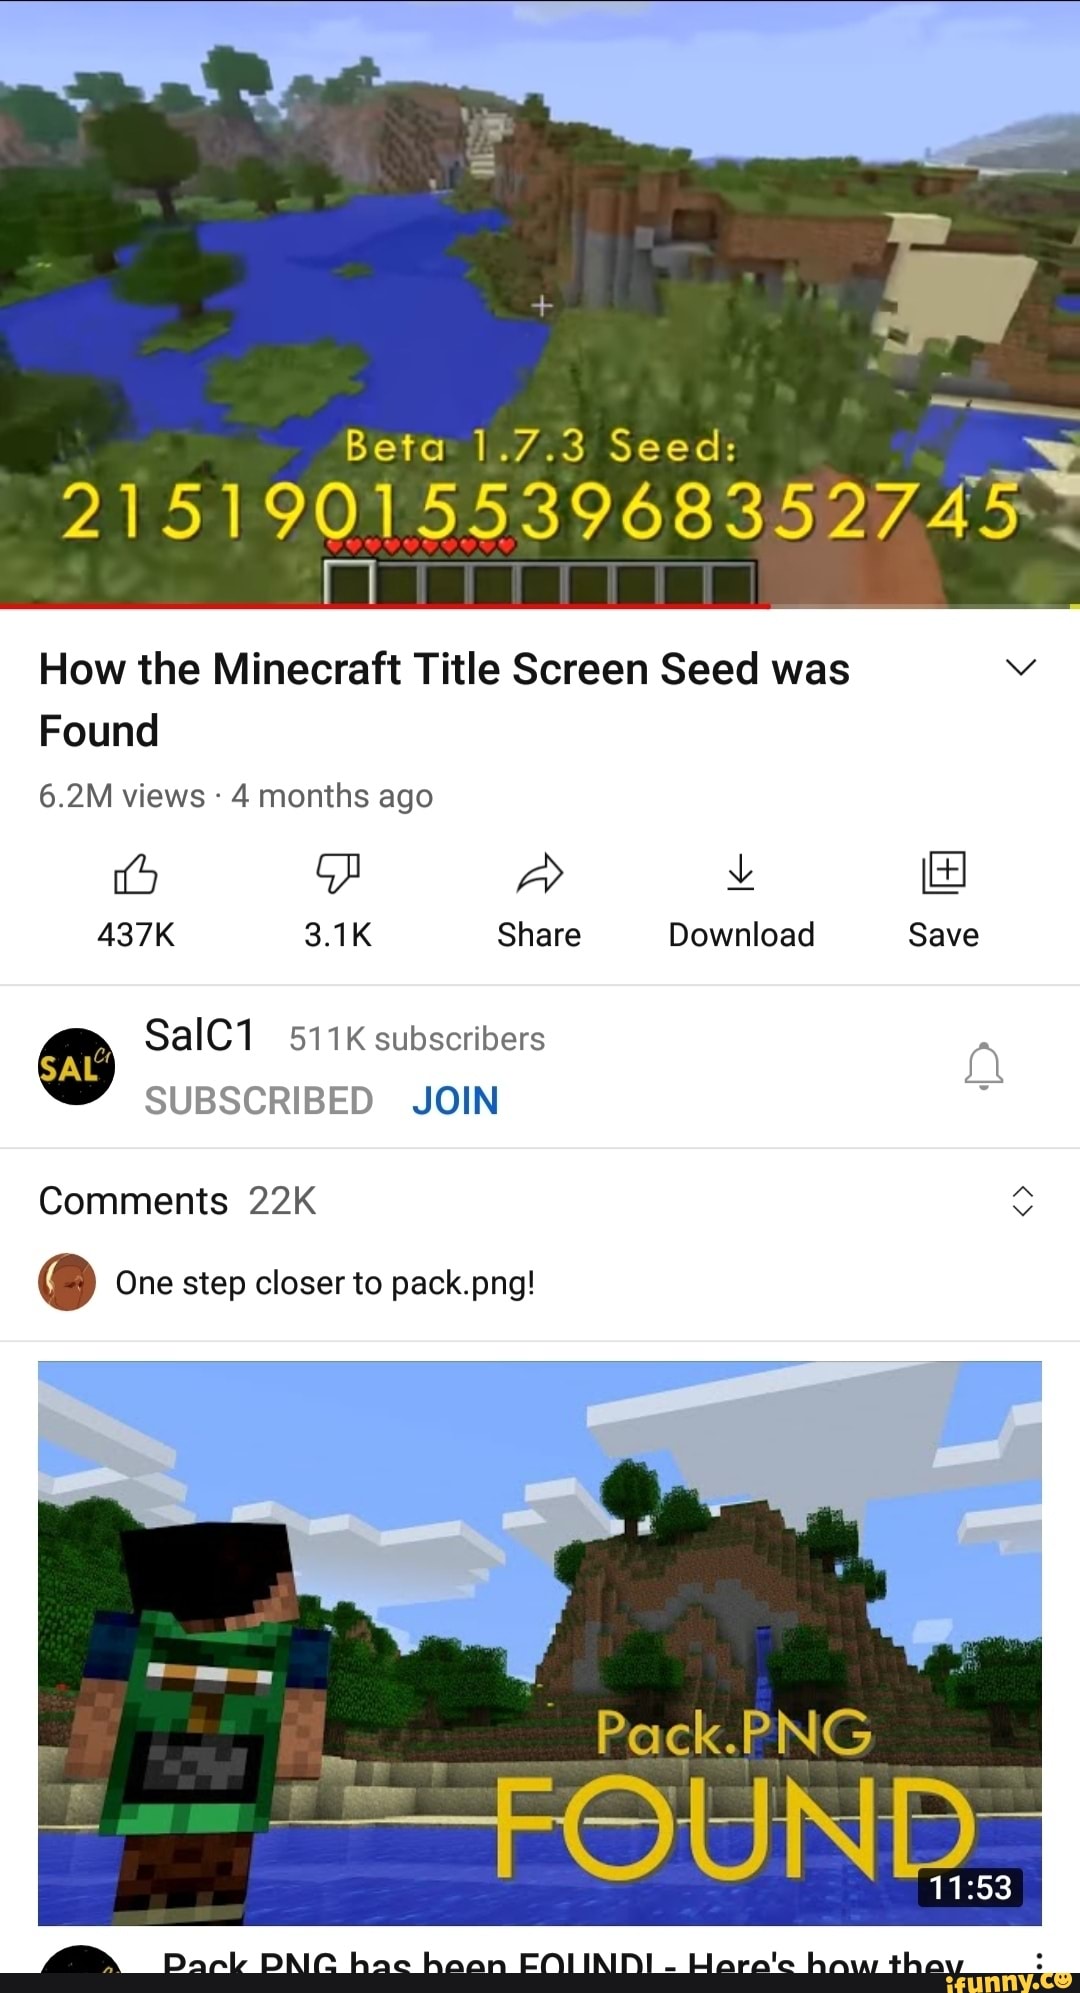 The Original Minecraft Title Screen World Seed Has Been Found, After being  in the game for nine years, someone finally found the world seed for the original  Minecraft title screen! 🙌🗺️